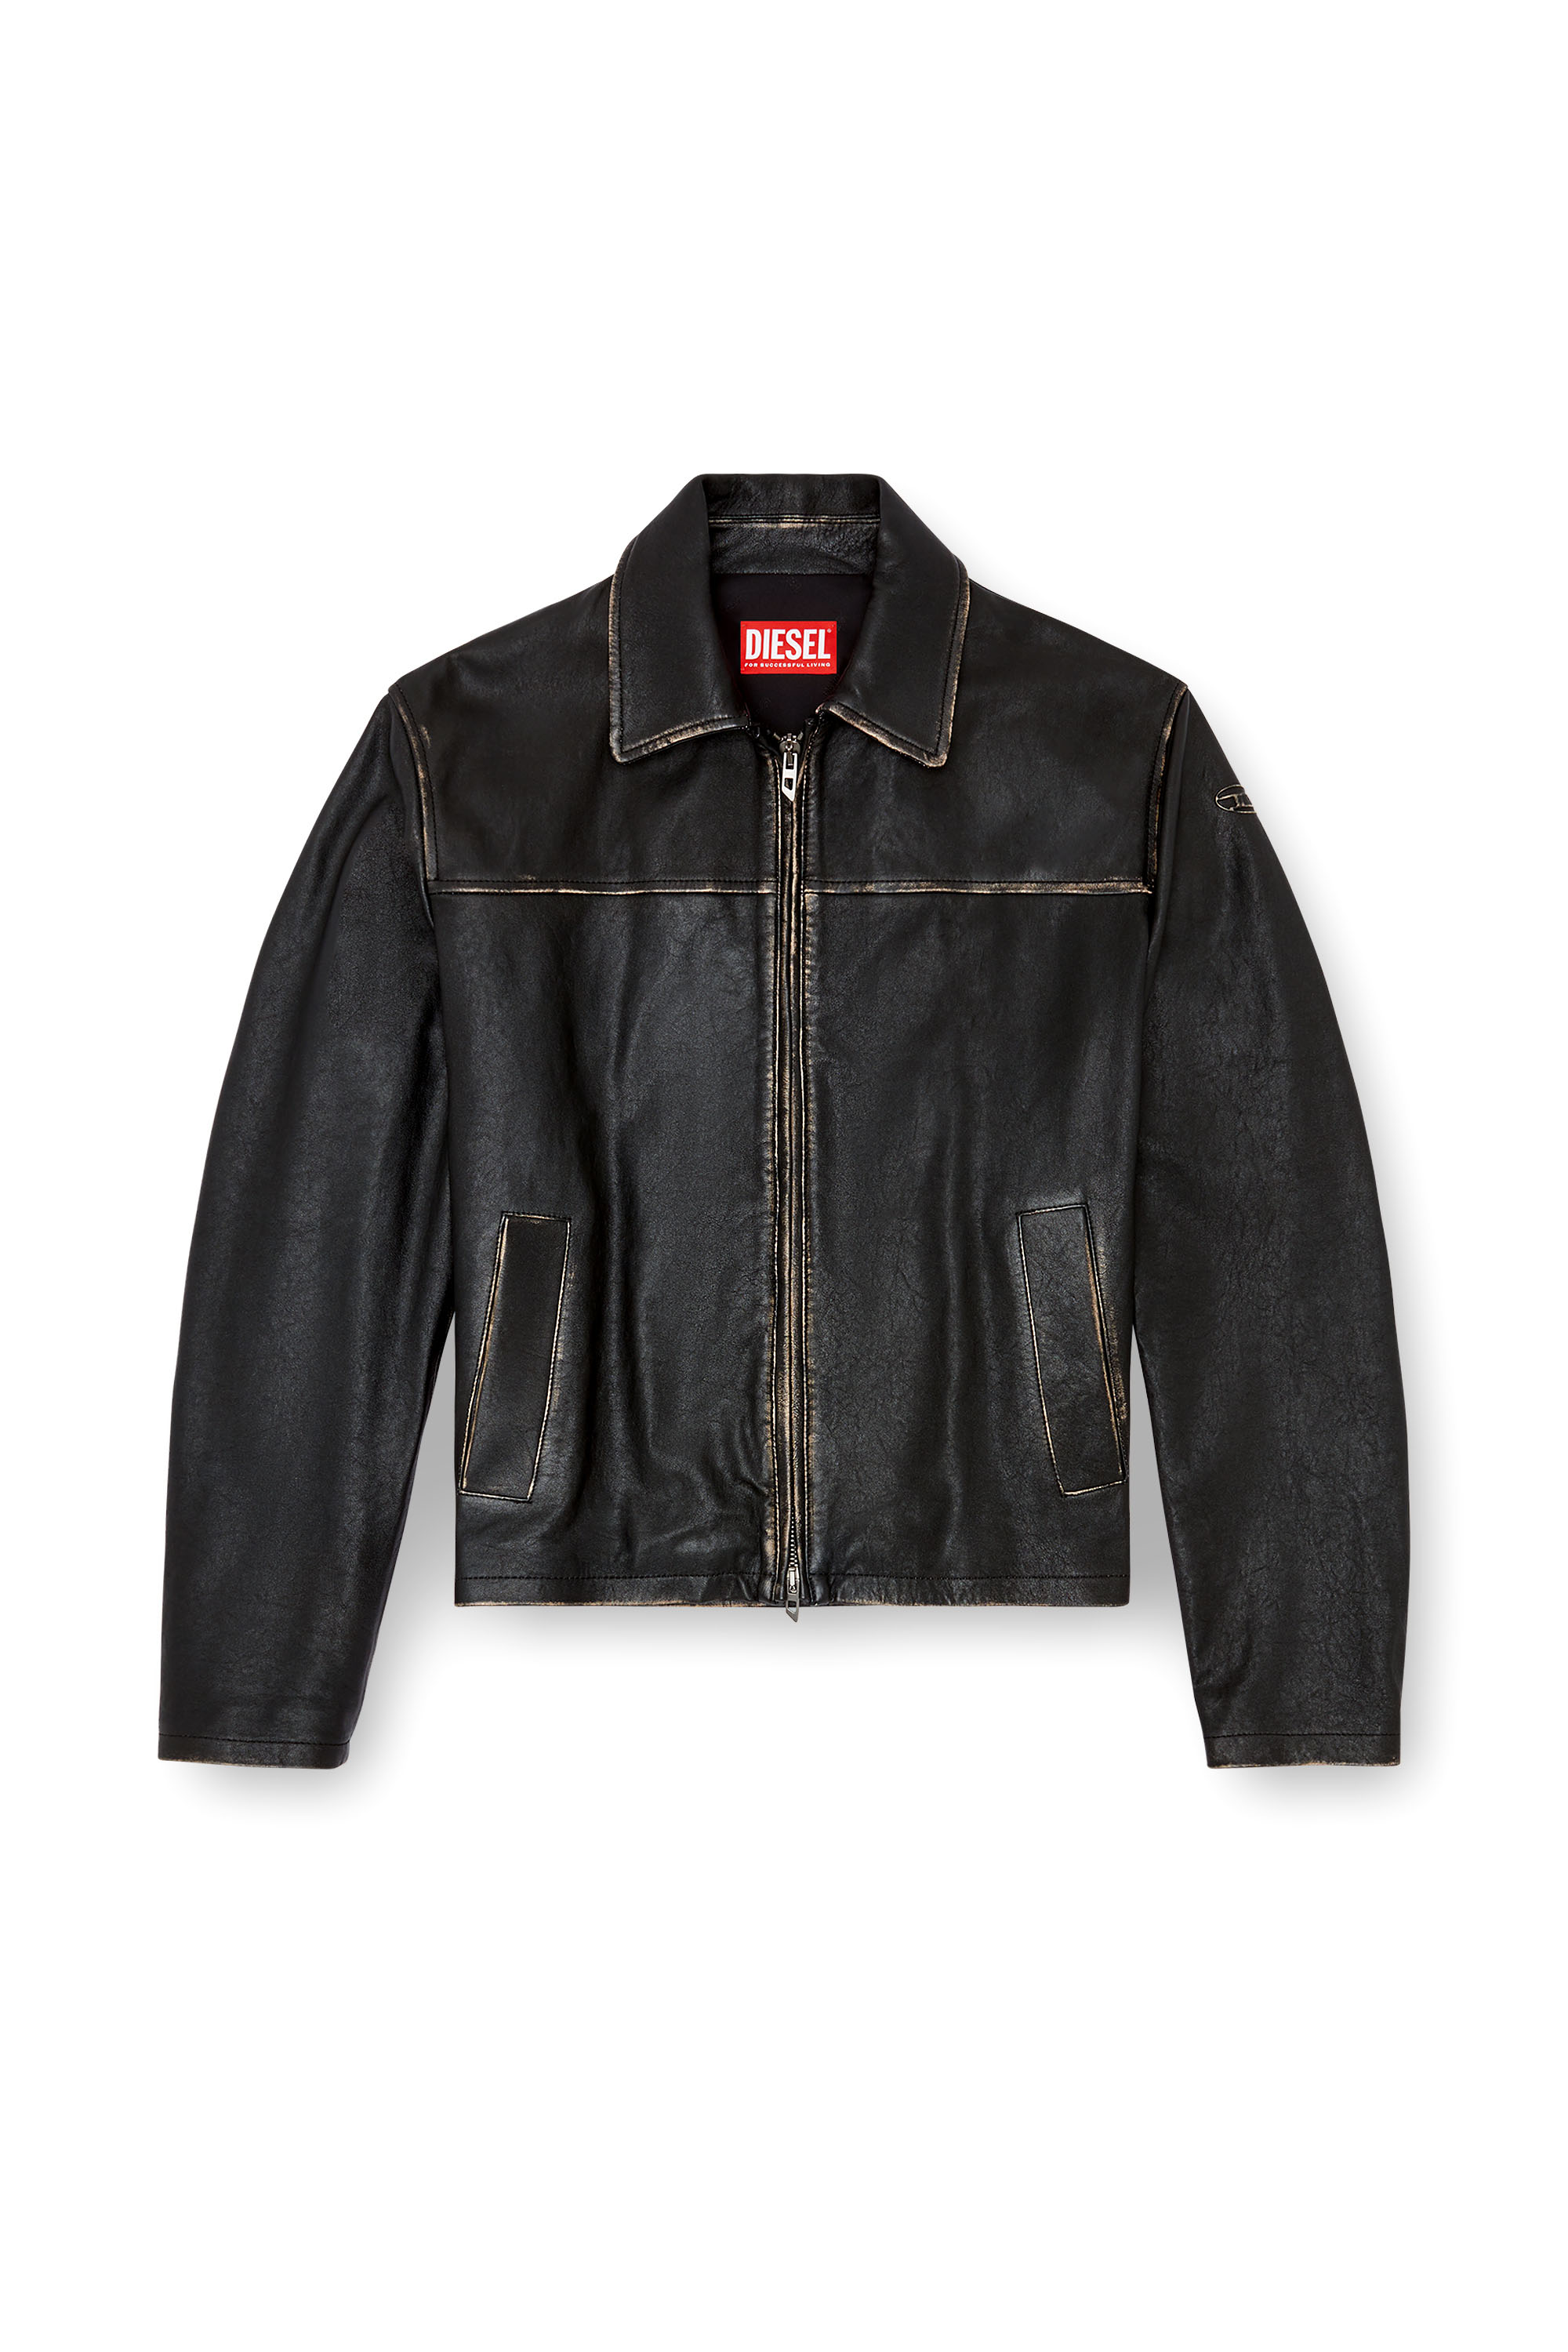 Diesel - L-BLIXIA, Uomo Giacca in pelle distressed in Nero - Image 3